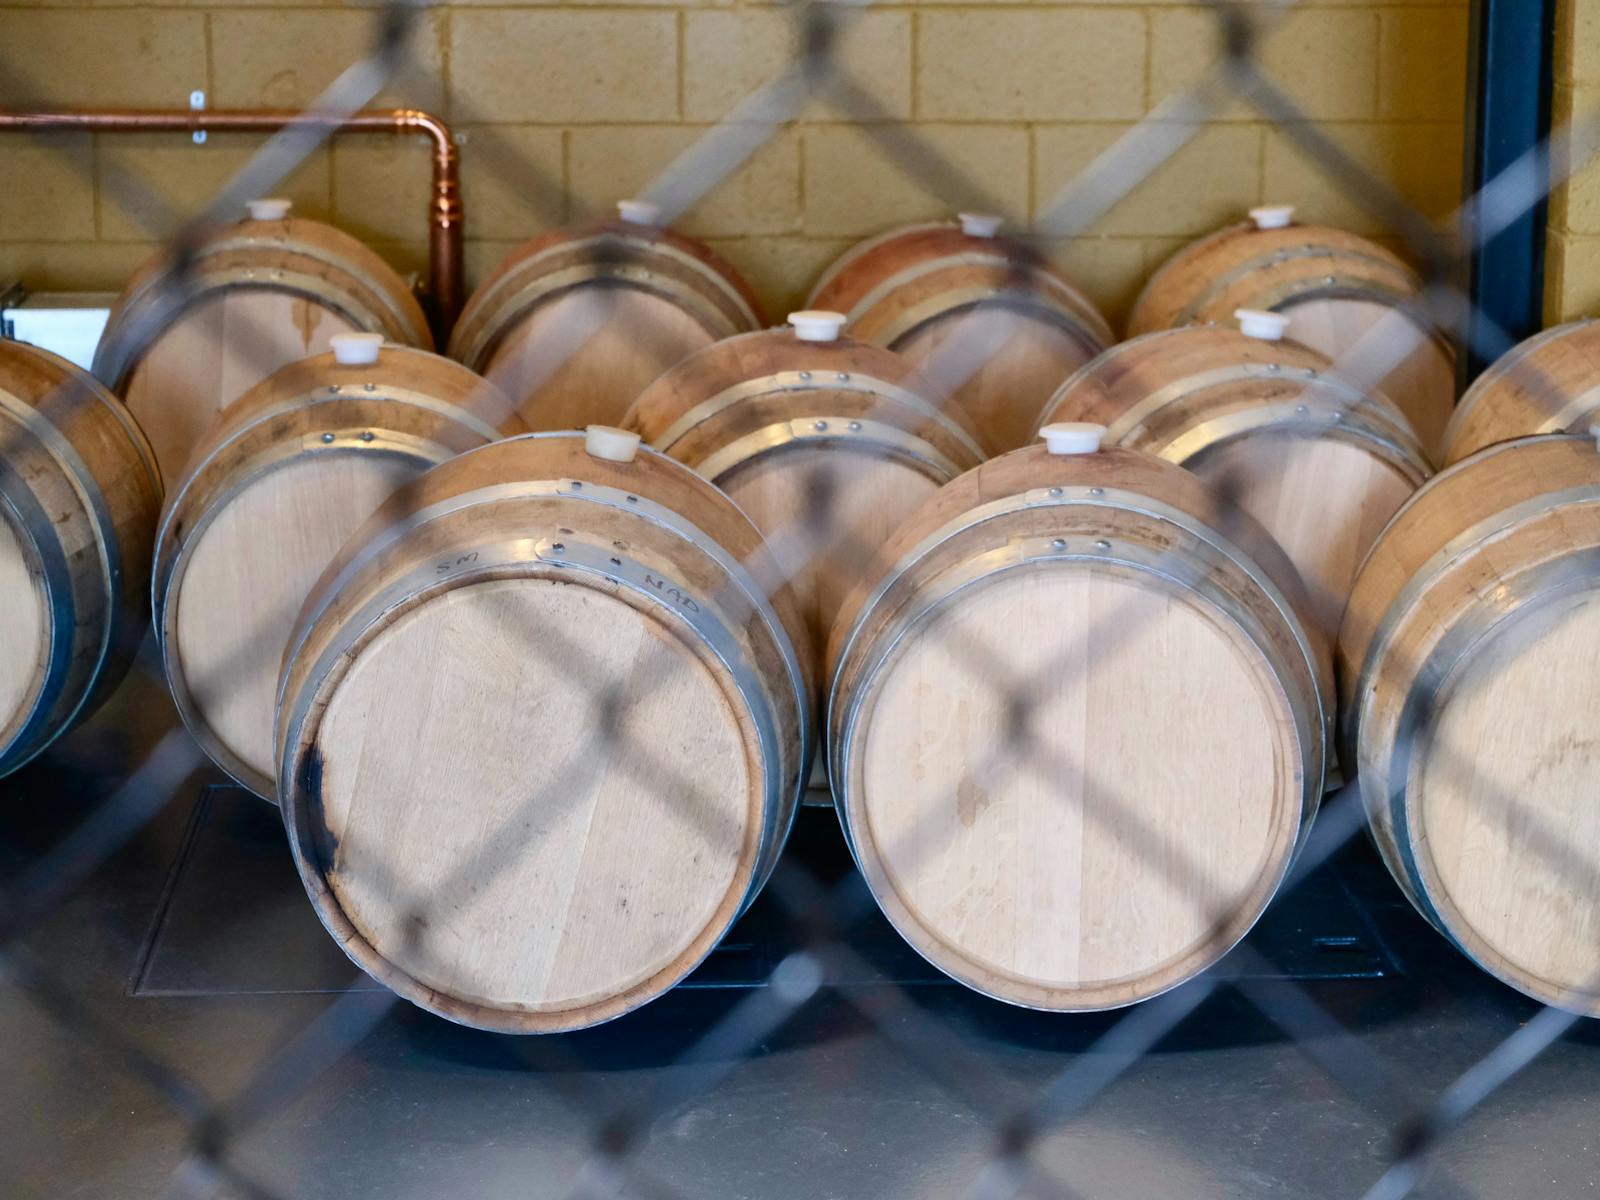 In the still room whisky casks lined up behind wire mesh fence